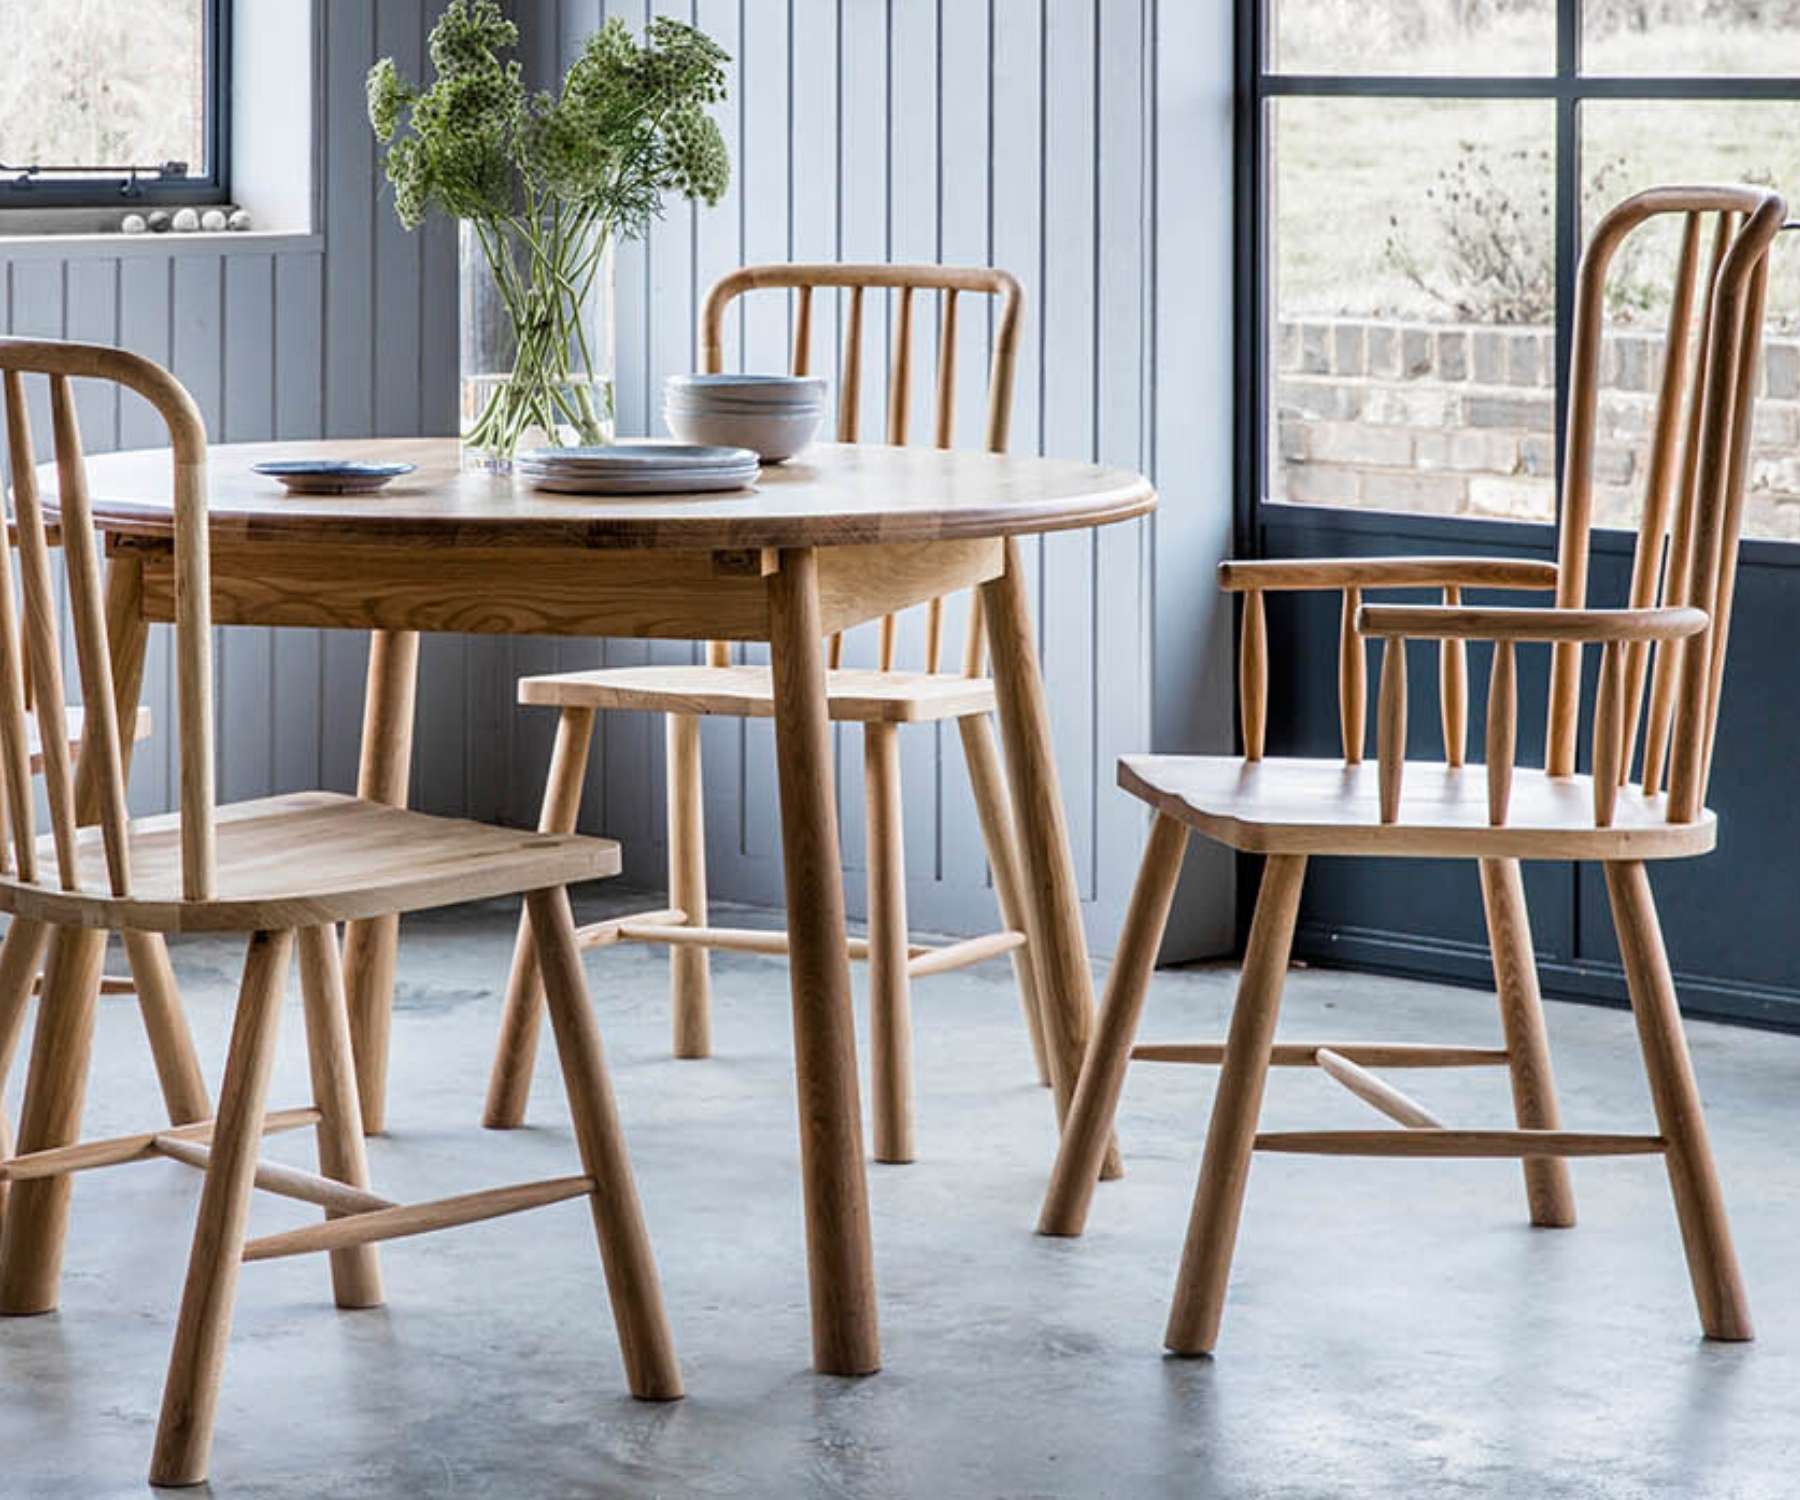 Scandi style round table and chairs